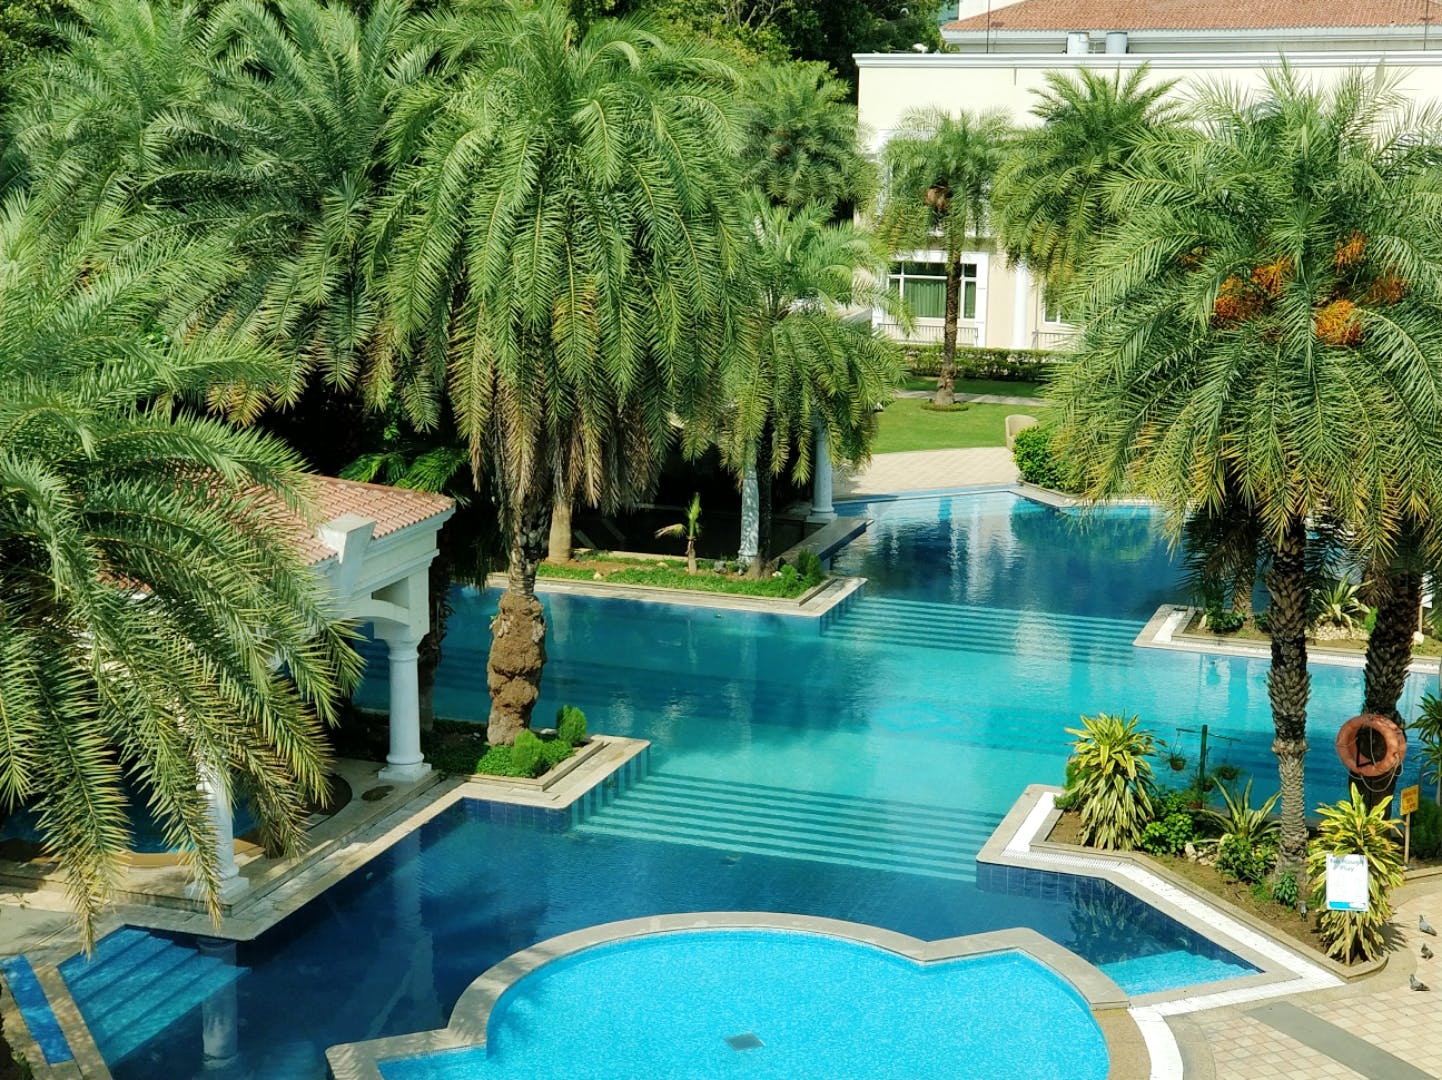 Swimming pool,Property,Resort,Palm tree,Building,Tree,Real estate,Arecales,Hotel,Leisure